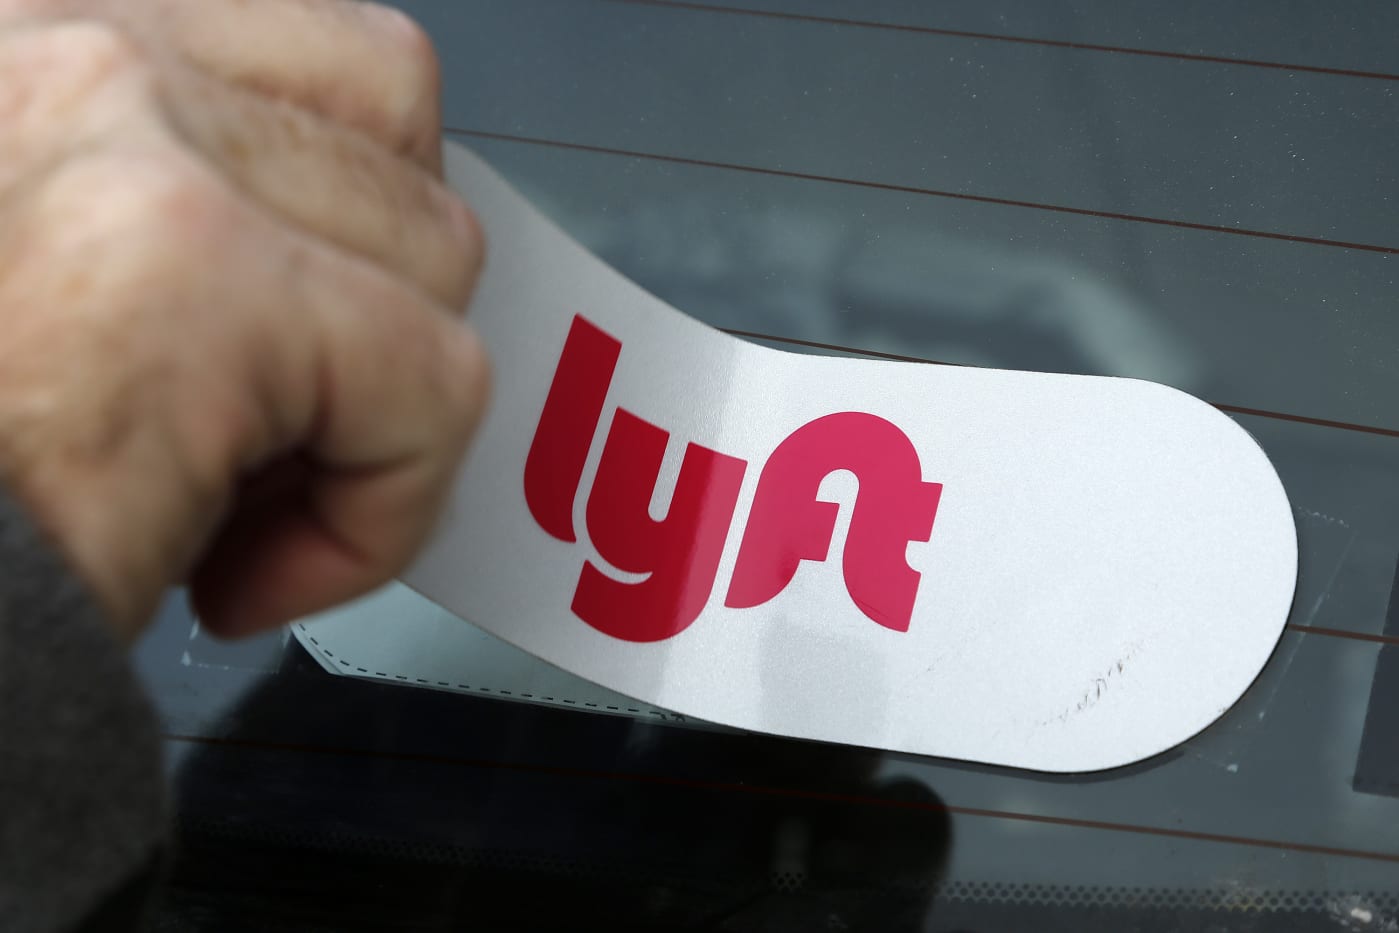 An earnings typo sent Lyft's stock price into the stratosphere